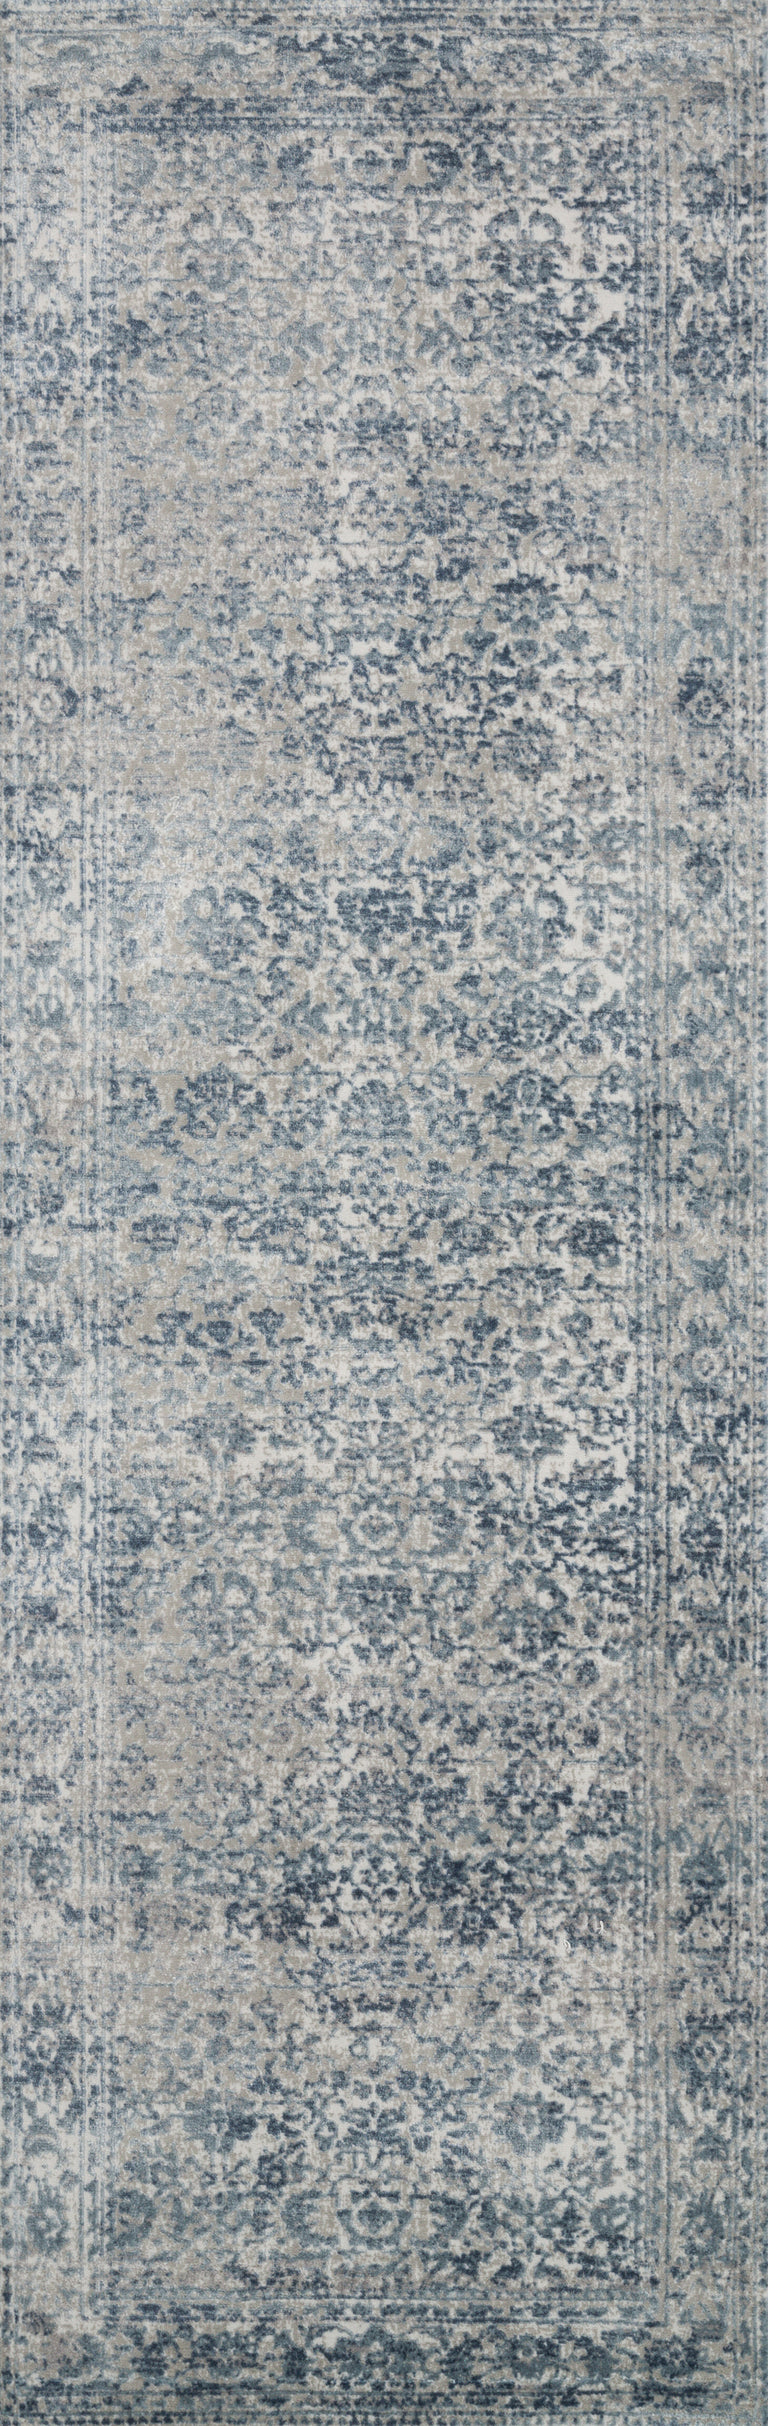 Loloi Rugs Patina Collection Rug in Sky, Stone - 7'10" x 7'10"